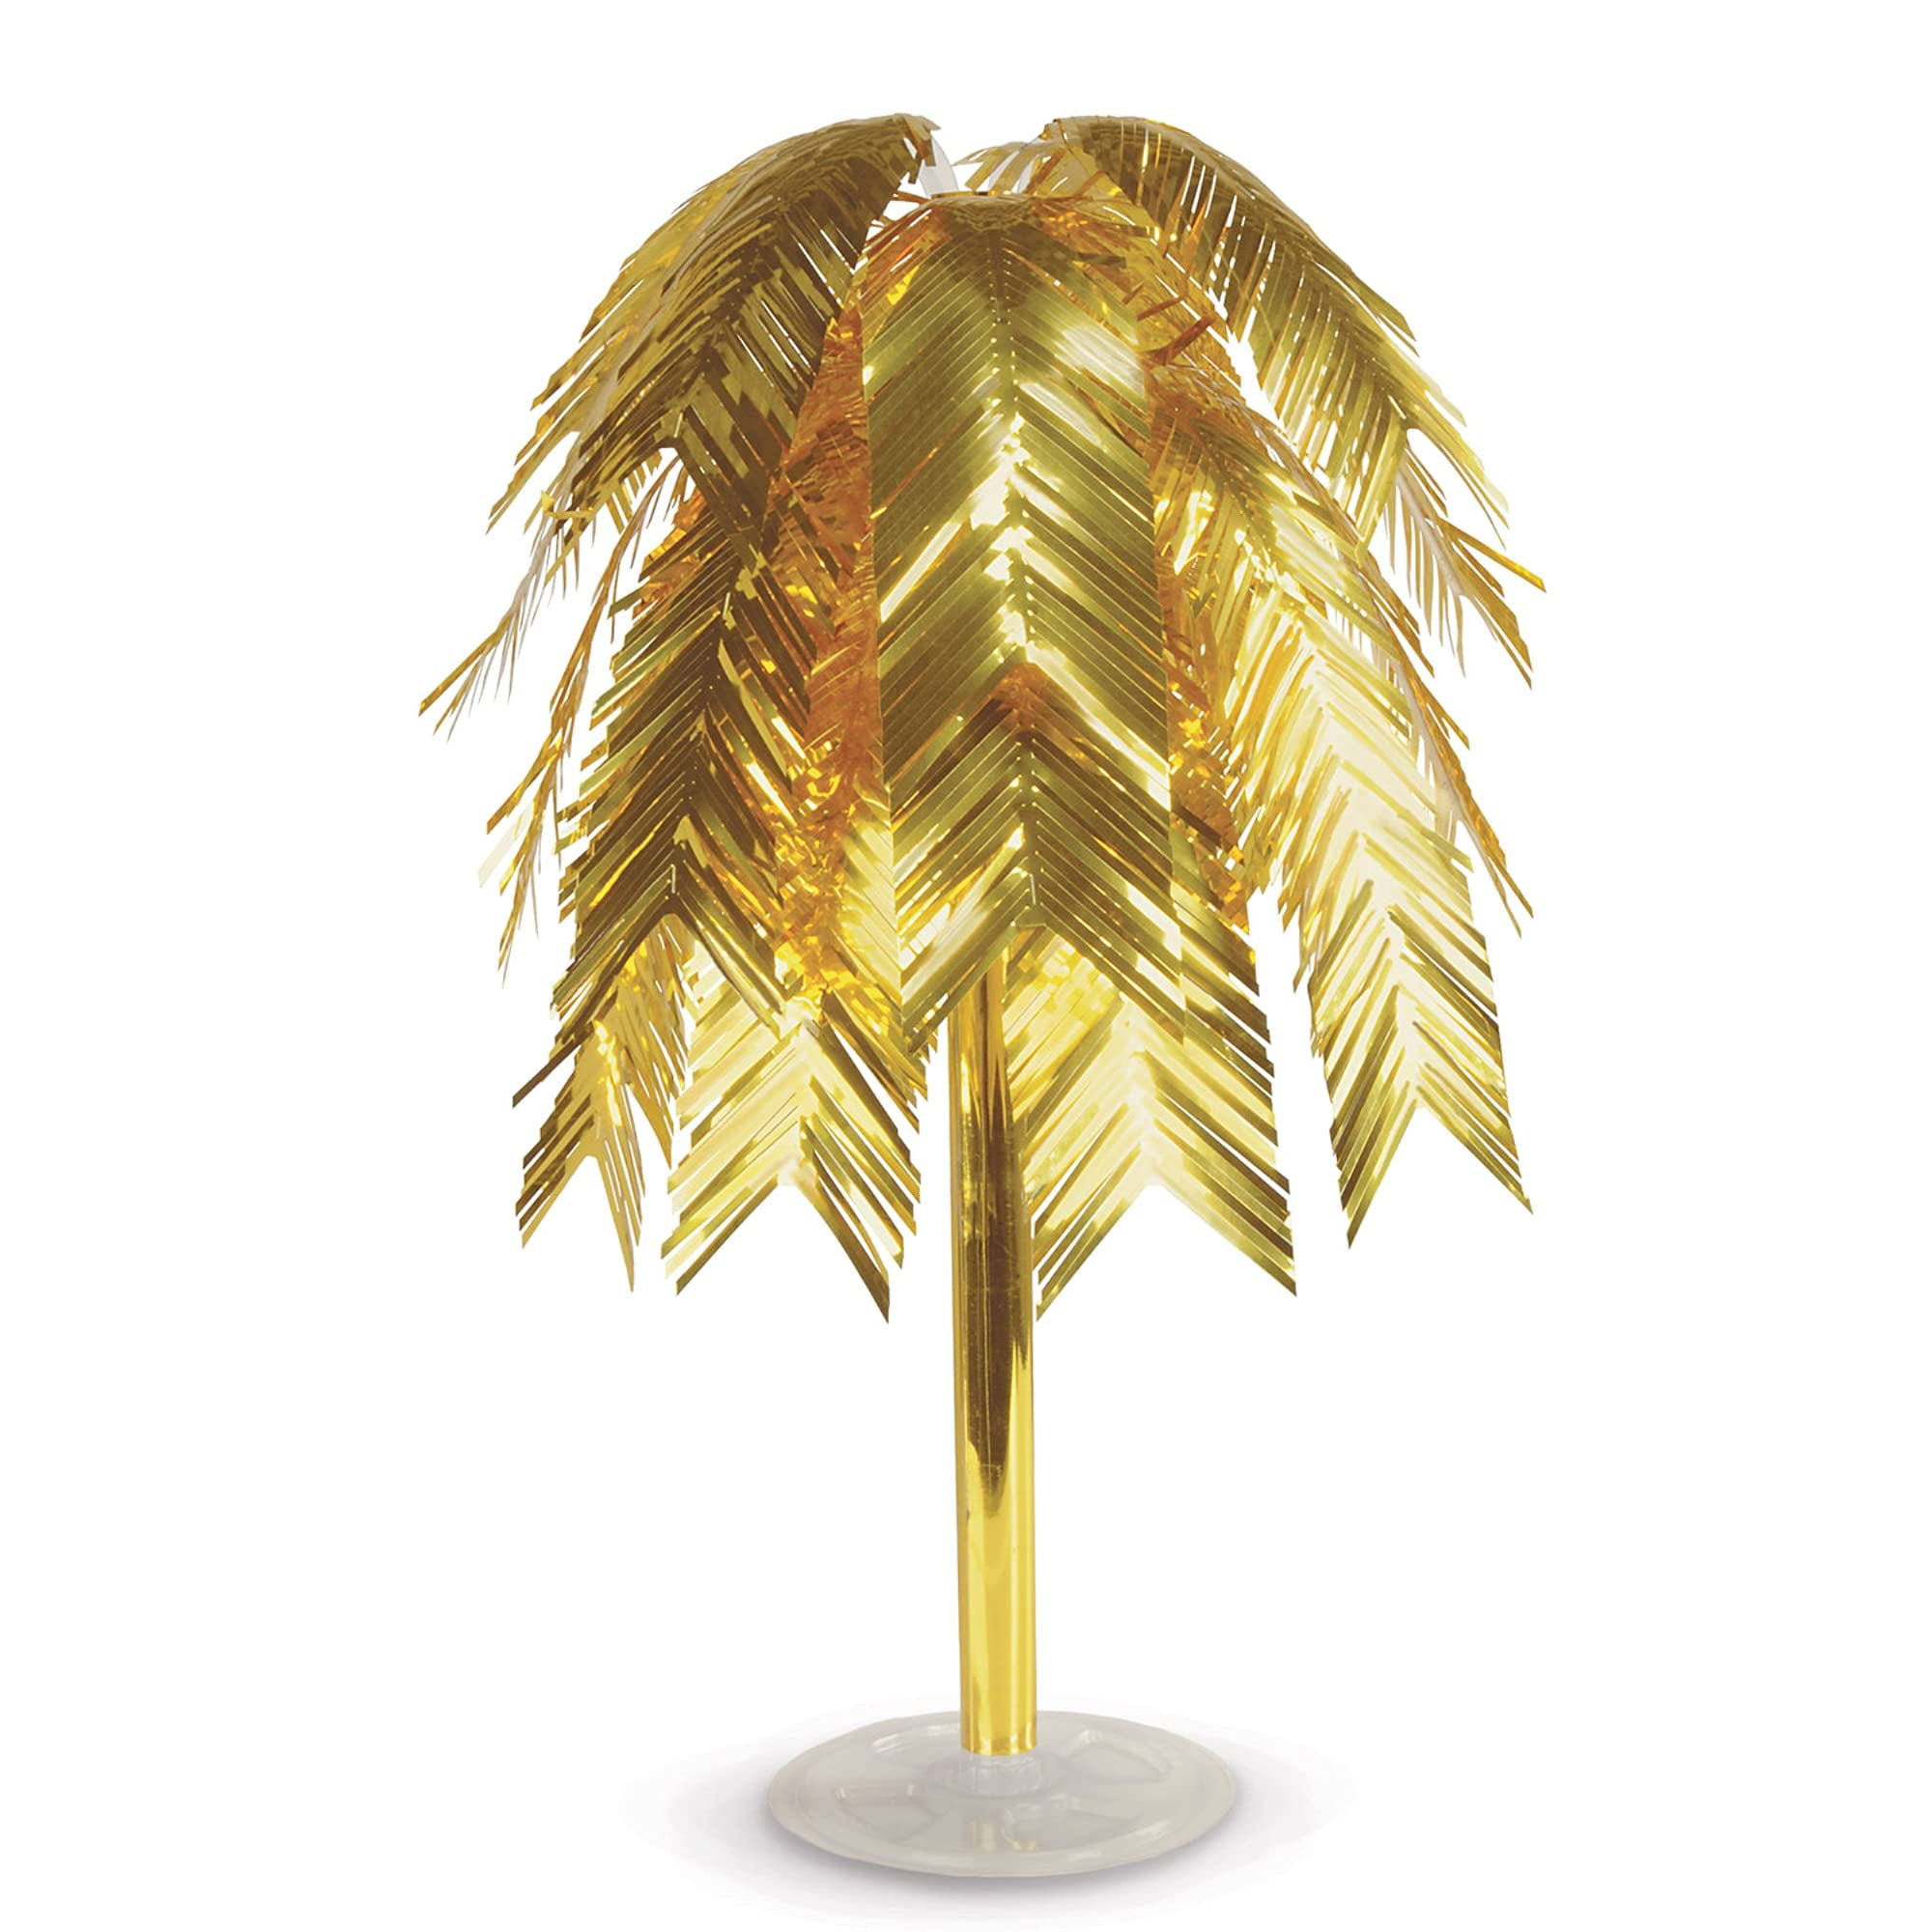 Picture of Beistle 53440-GD 24 in. Metallic Cascade Centerpiece, Gold - Pack of 6